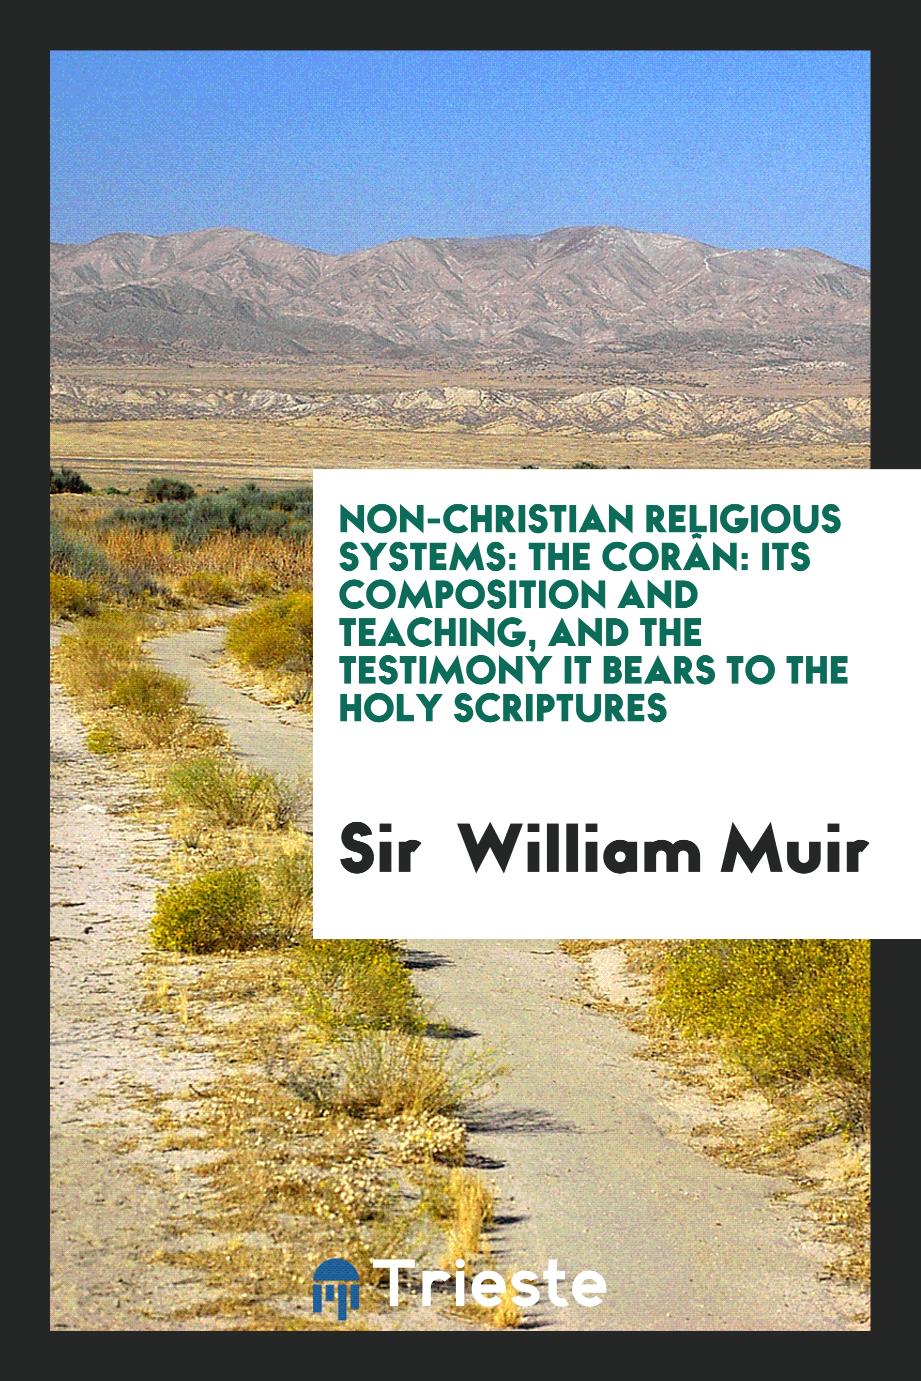 Non-Christian Religious Systems: The Corân: Its Composition and Teaching, and the Testimony It Bears to the Holy Scriptures